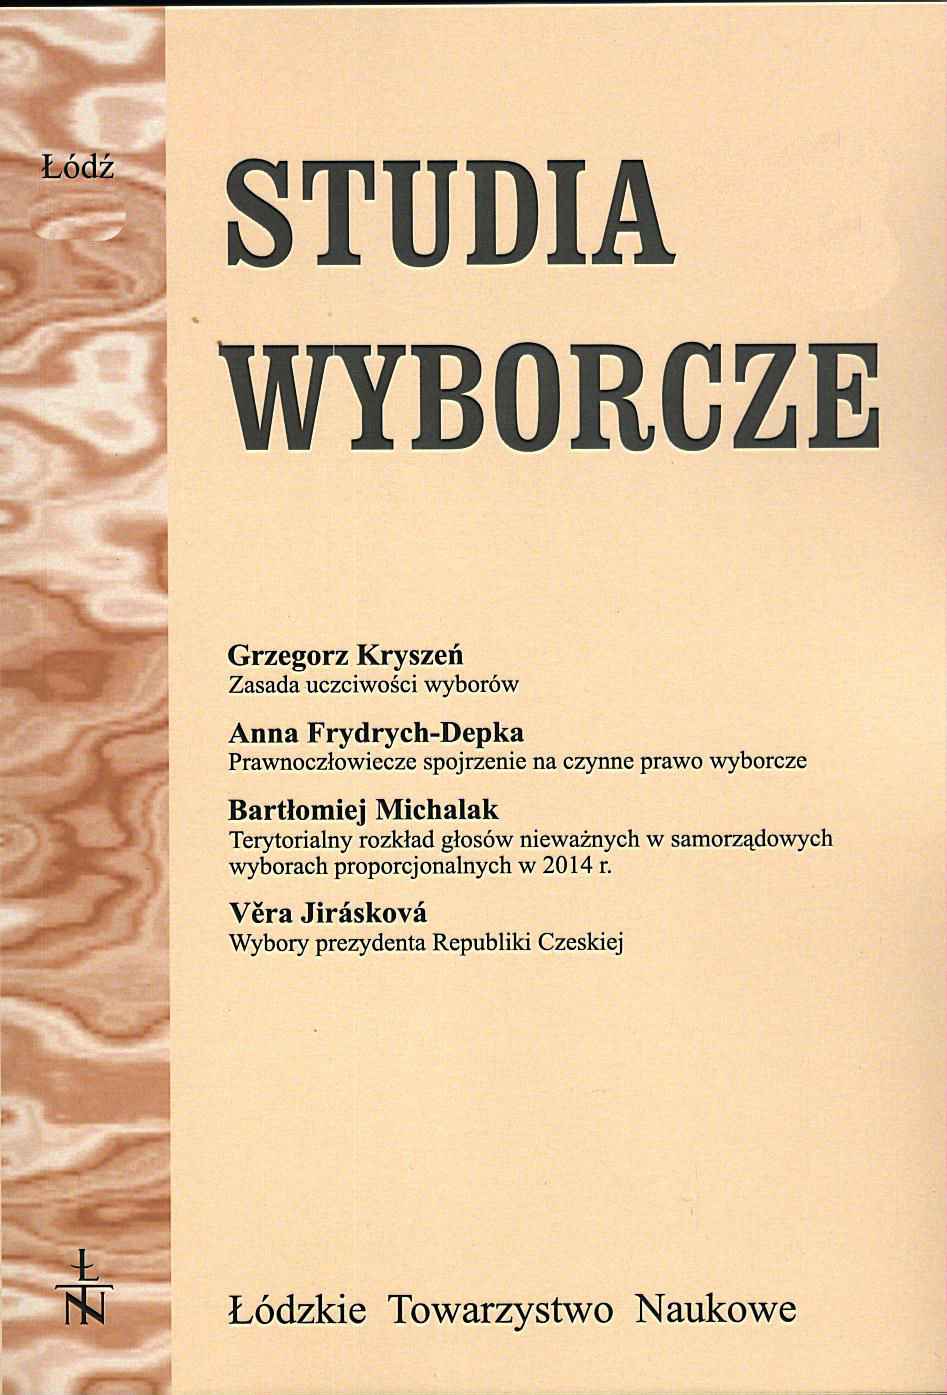 The electoral system to the lower house of parliament and its influence on the party system – the case of Poland and Great Britain Cover Image